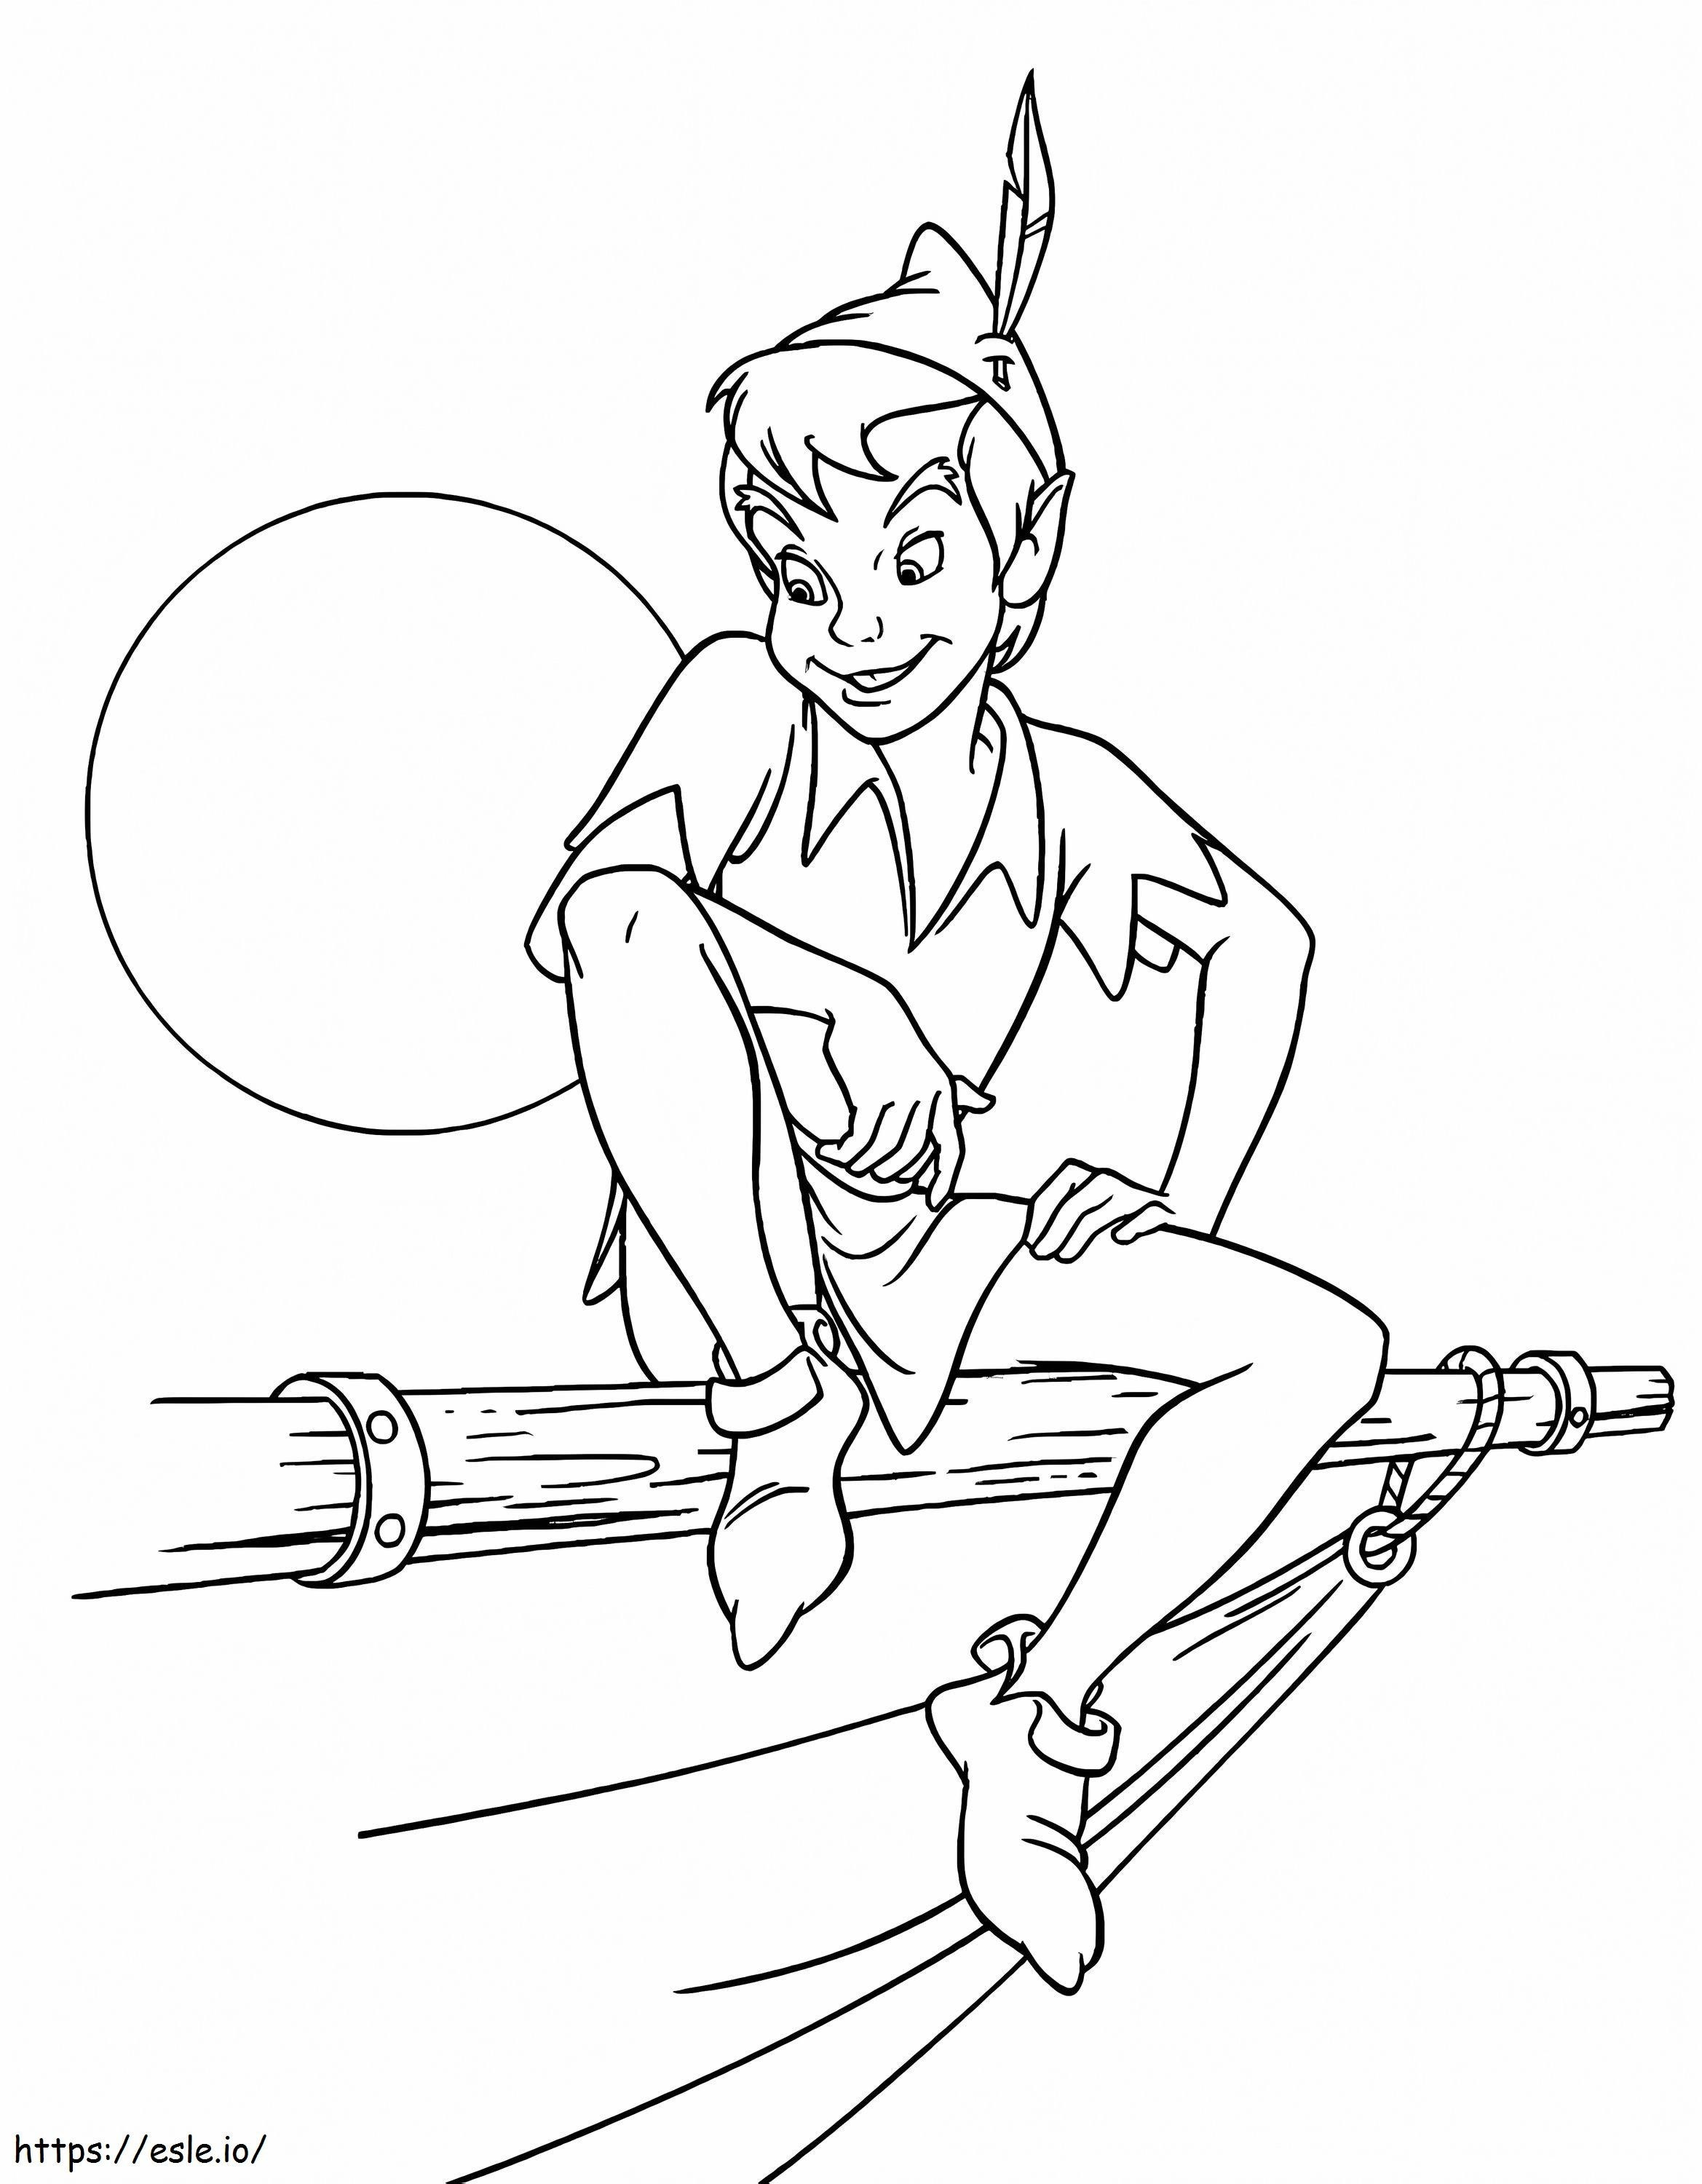 1545726026 Peter Pan 28 With Peter Pan coloring page